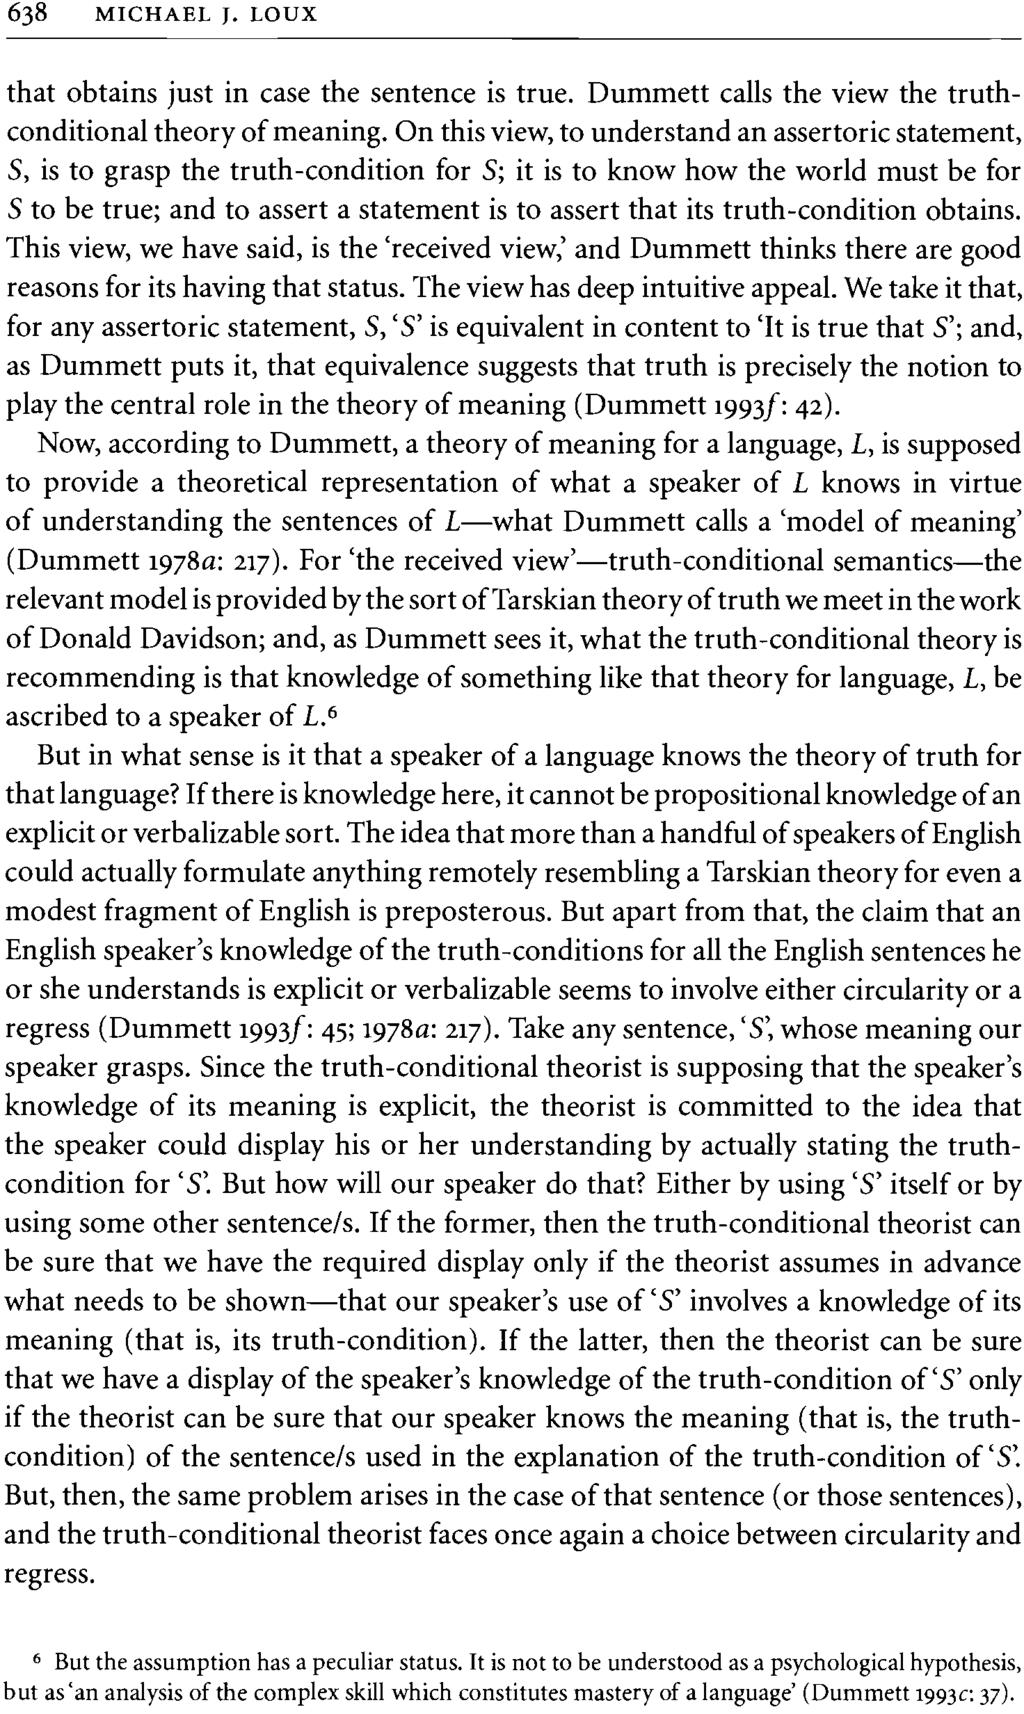 638 MICHAEL J. LOUX that obtains just in case the sentence is true. Dummett calls the view the truthconditional theory of meaning.